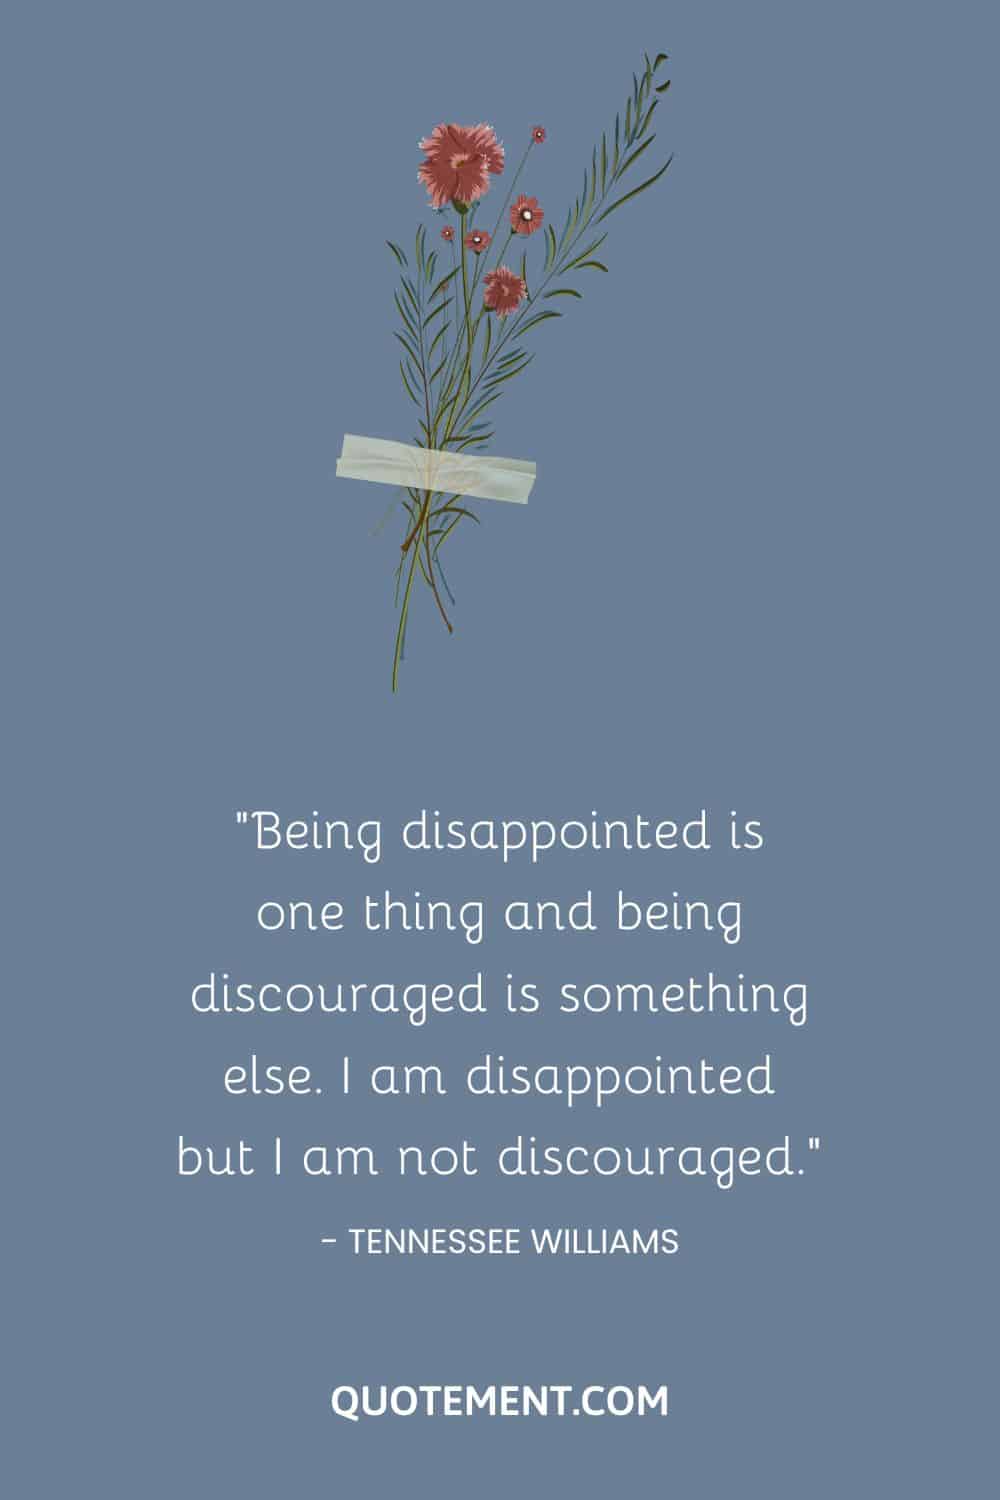 Being disappointed is one thing and being discouraged is something else